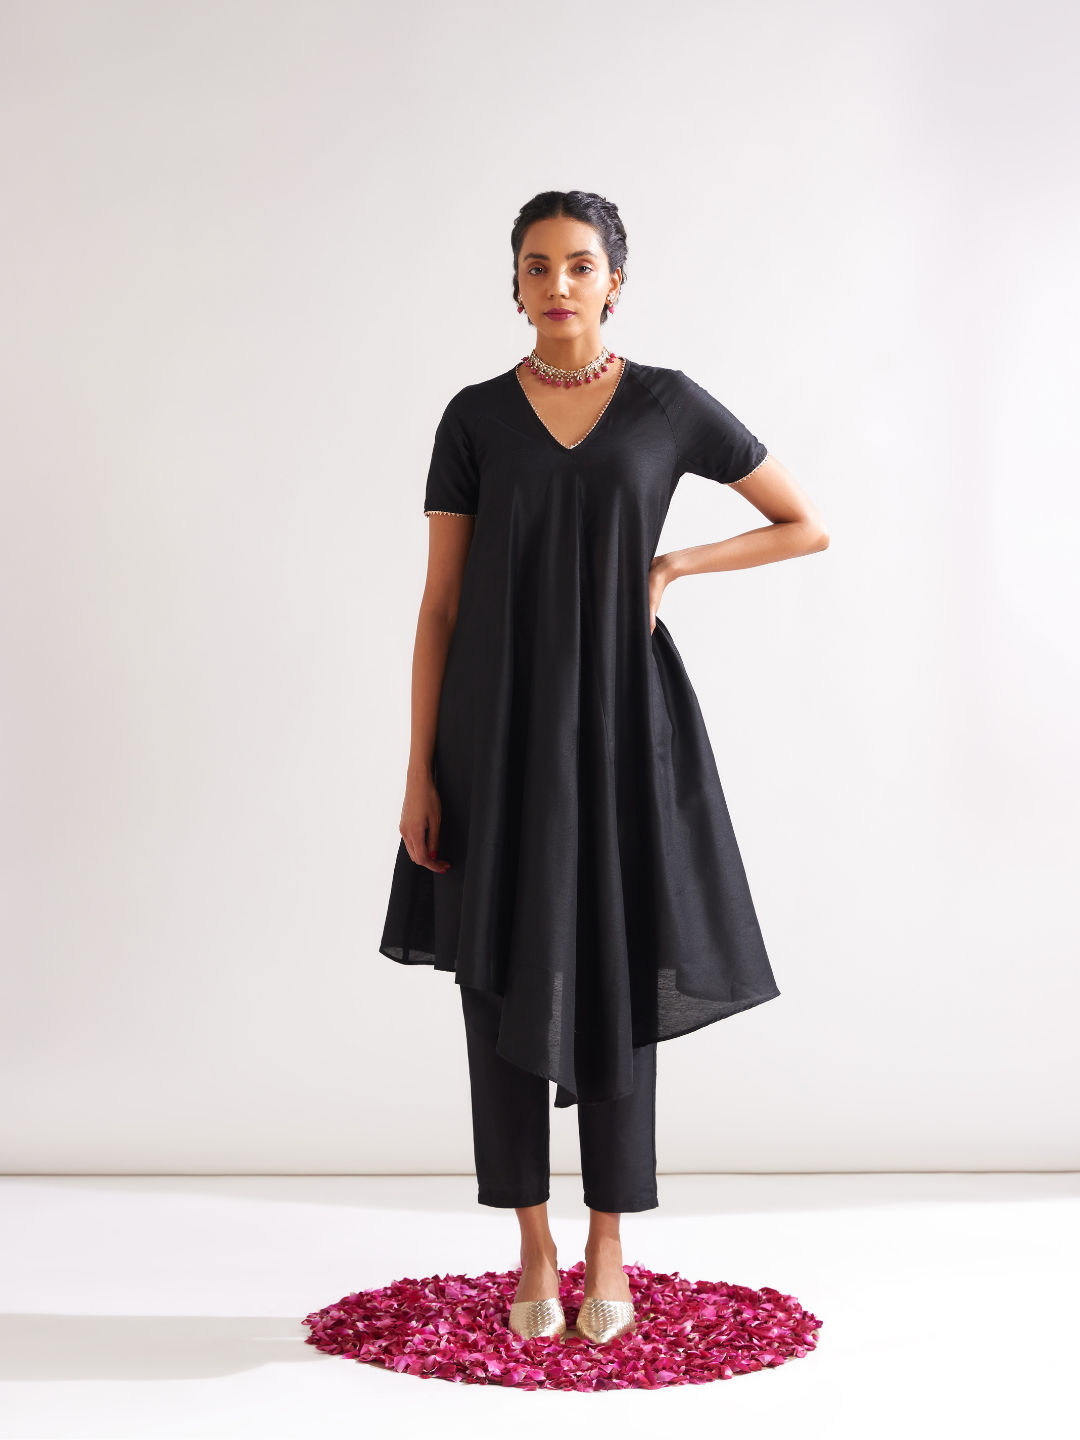 Gulmohar Petal kurta highlighted with gota patti paired with pegged pants along with dupatta- Rich black